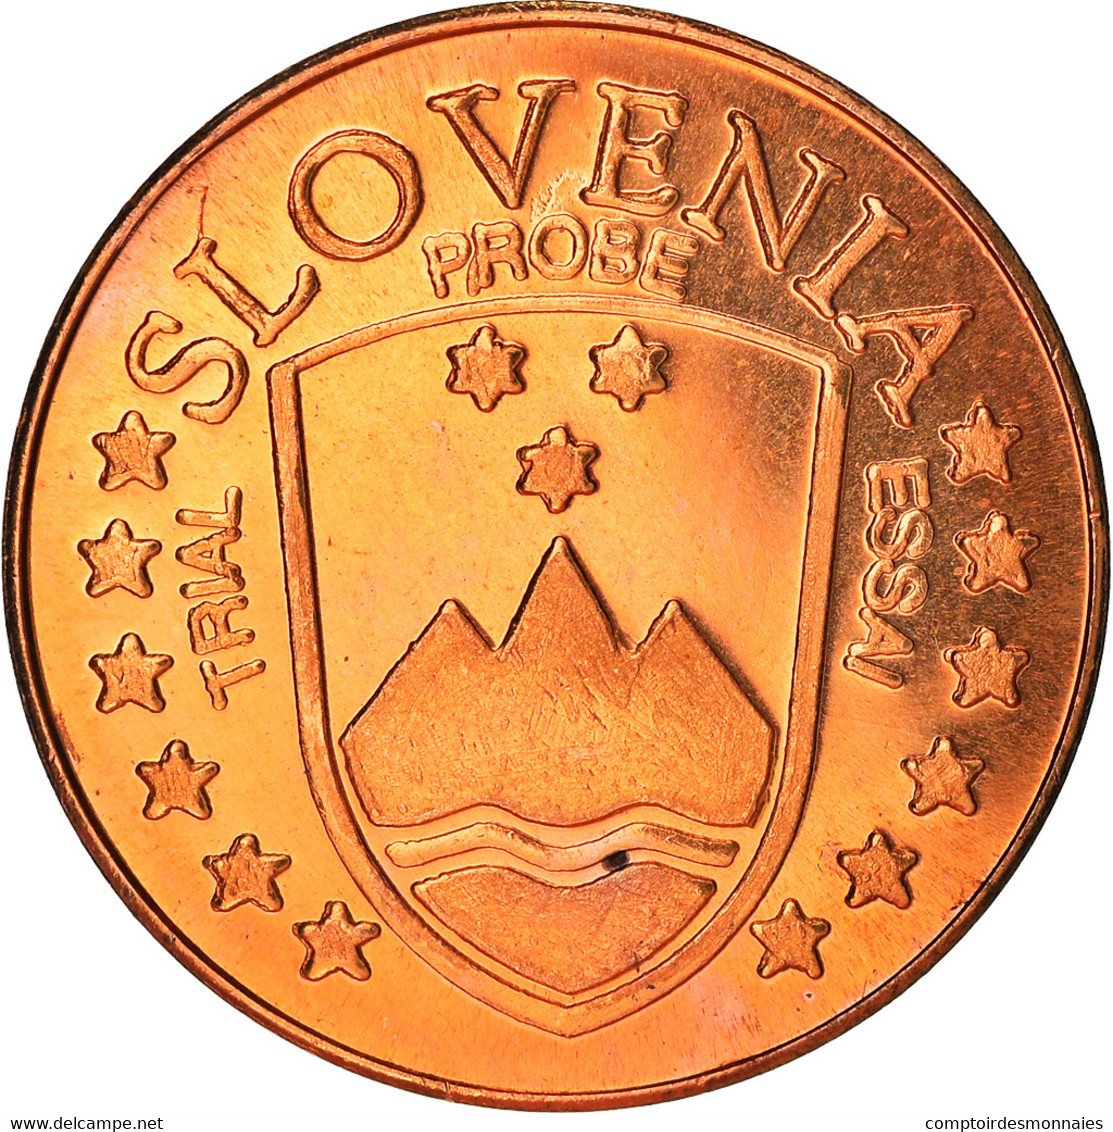 Slovénie, Fantasy Euro Patterns, 5 Euro Cent, 2004, Proof, FDC, Copper Plated - Privatentwürfe